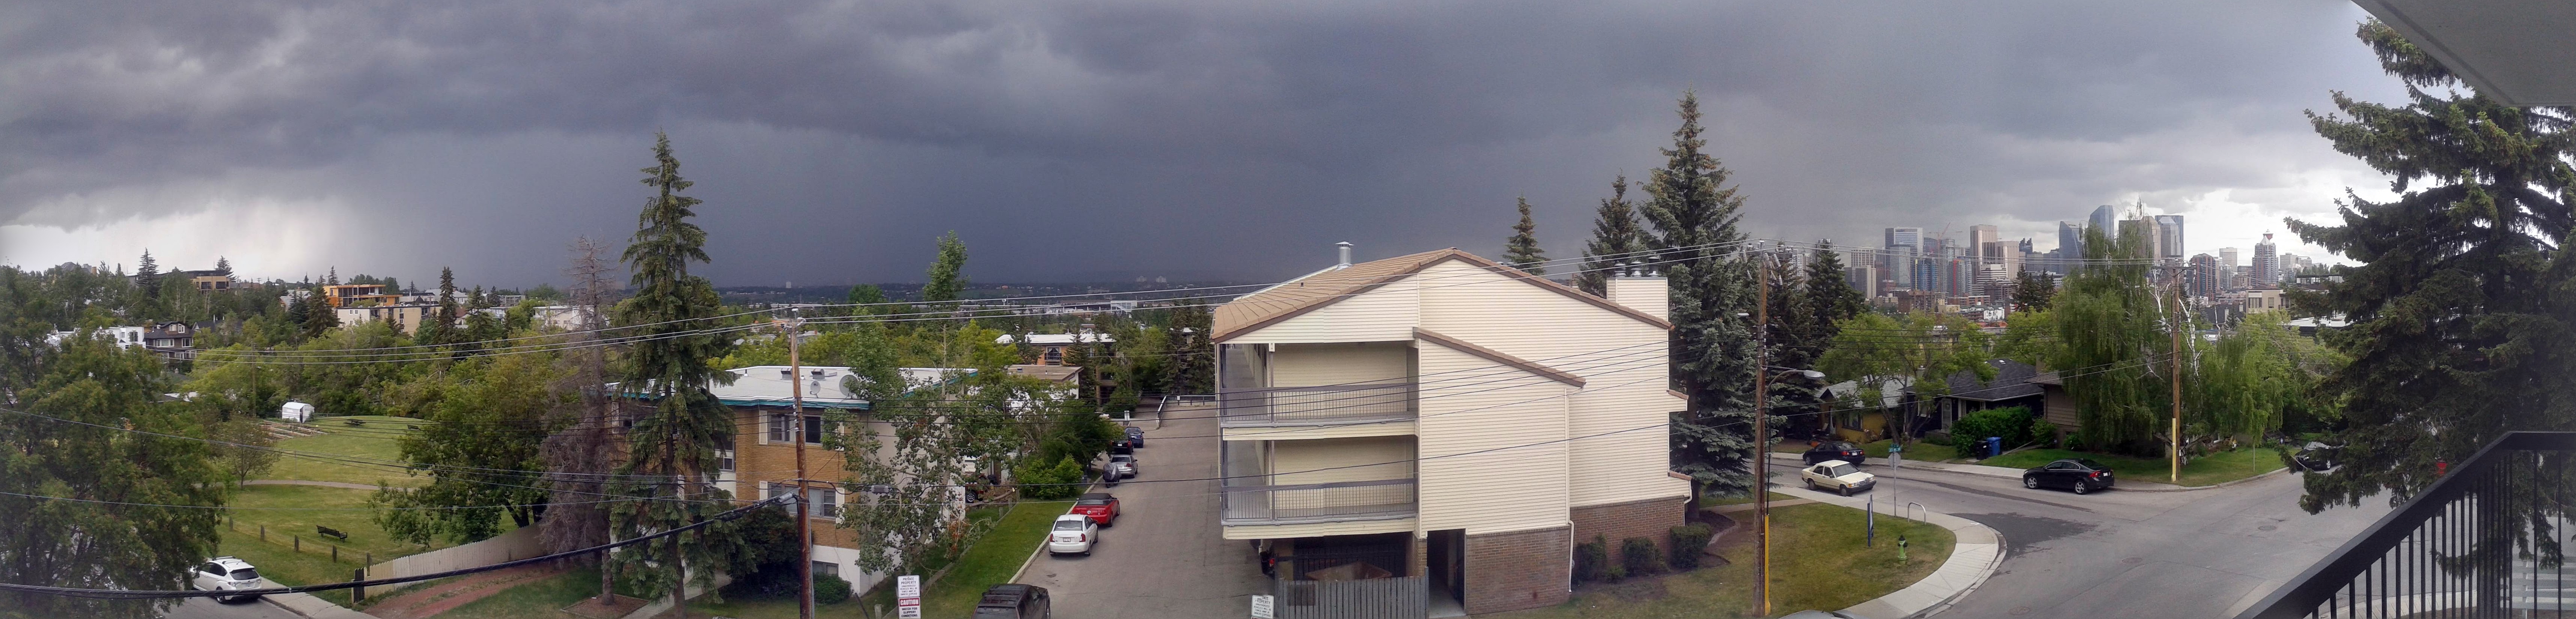 Bankview, Storm, from the balcony